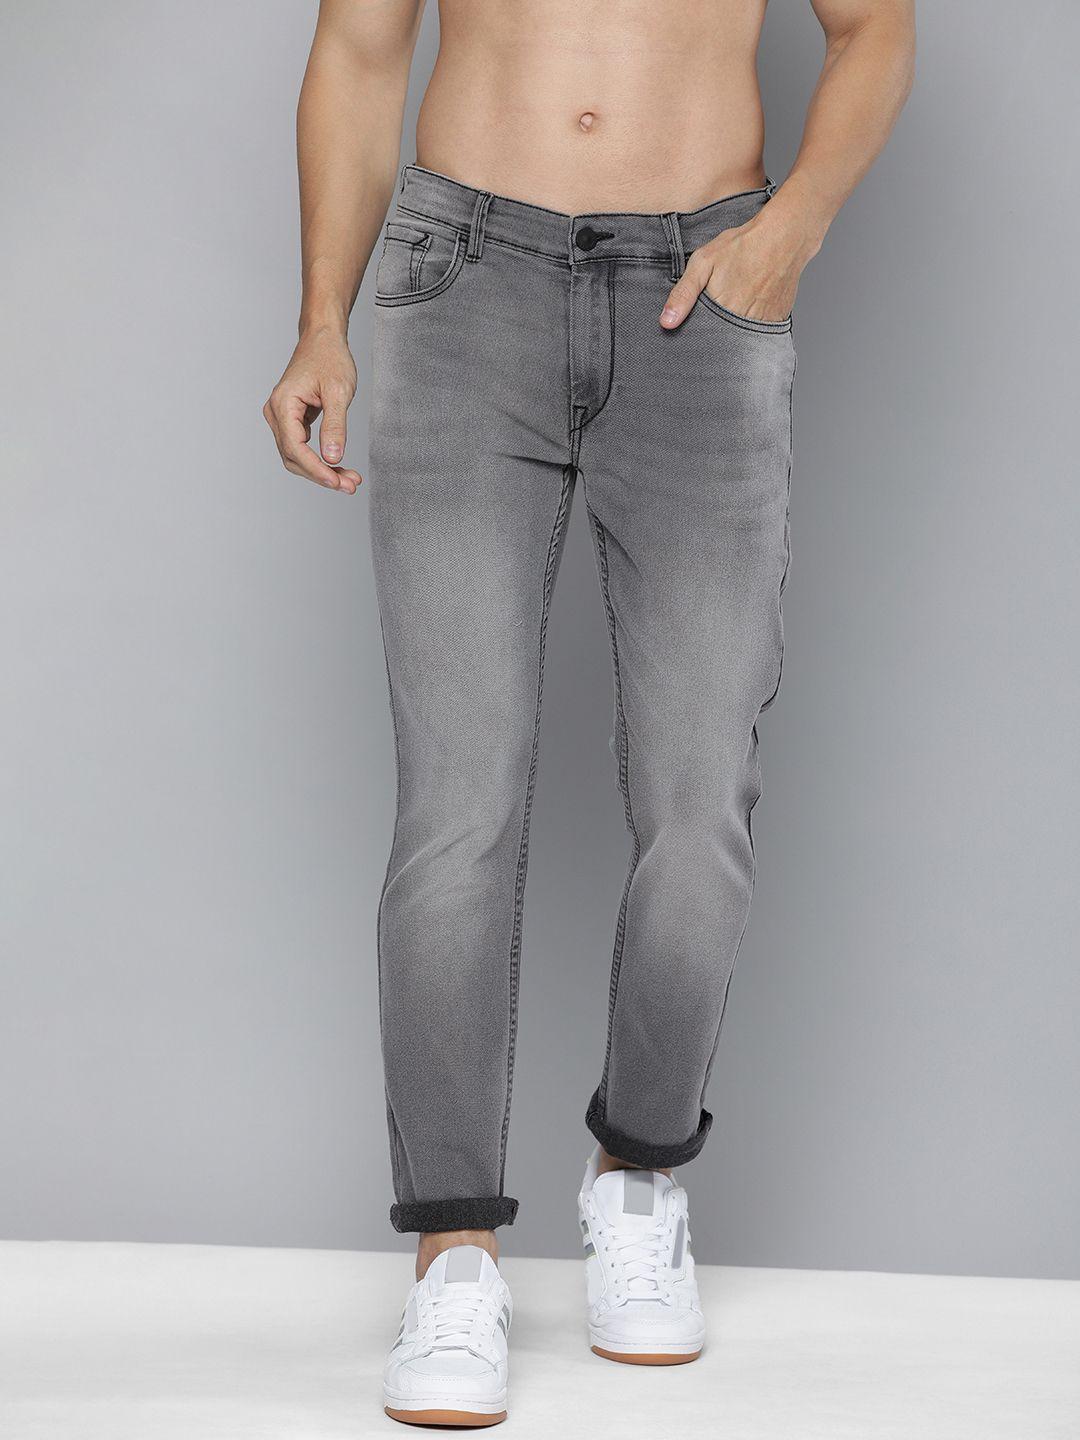 here&now men grey slim fit light fade stretchable jeans